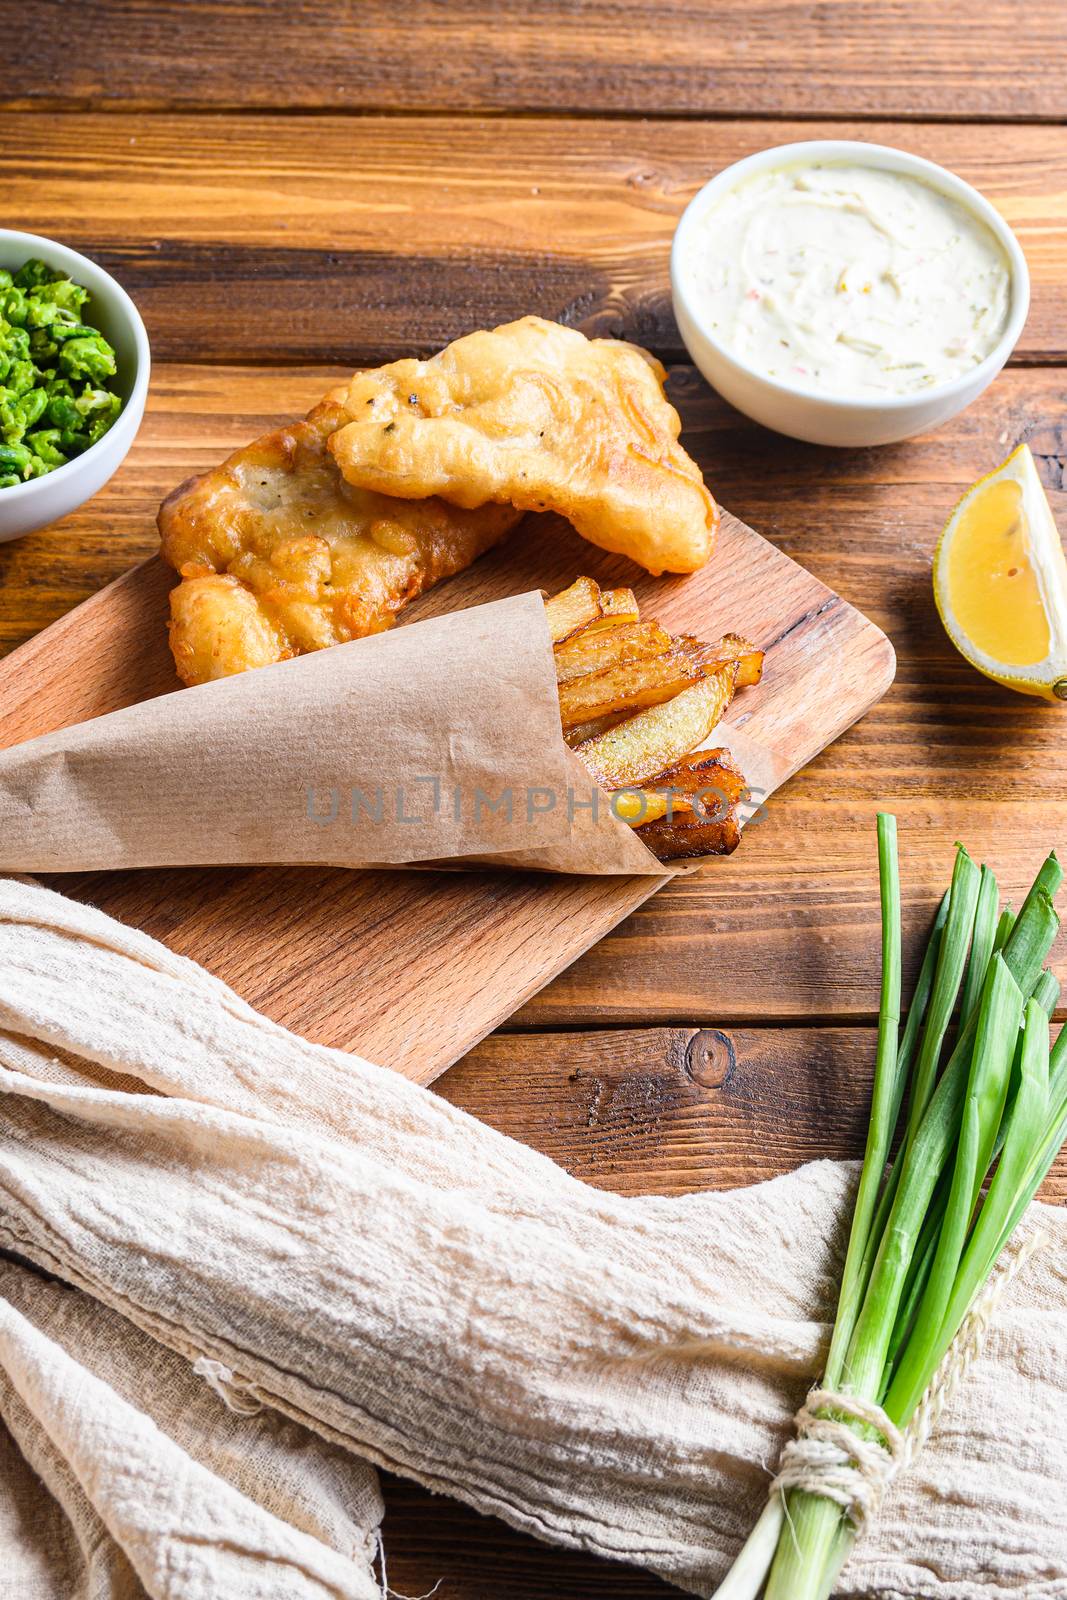 Traditional Fish and chips with mashed peas, tartar sauce inn crumpled paper cone on wood chopping board dip and lemon - fried cod, french fries, lemon slices, tartar sauce, ketchup tomatoe served in the Pub or Restaurant over light old wooden planks table vertical side view close up. High quality photo